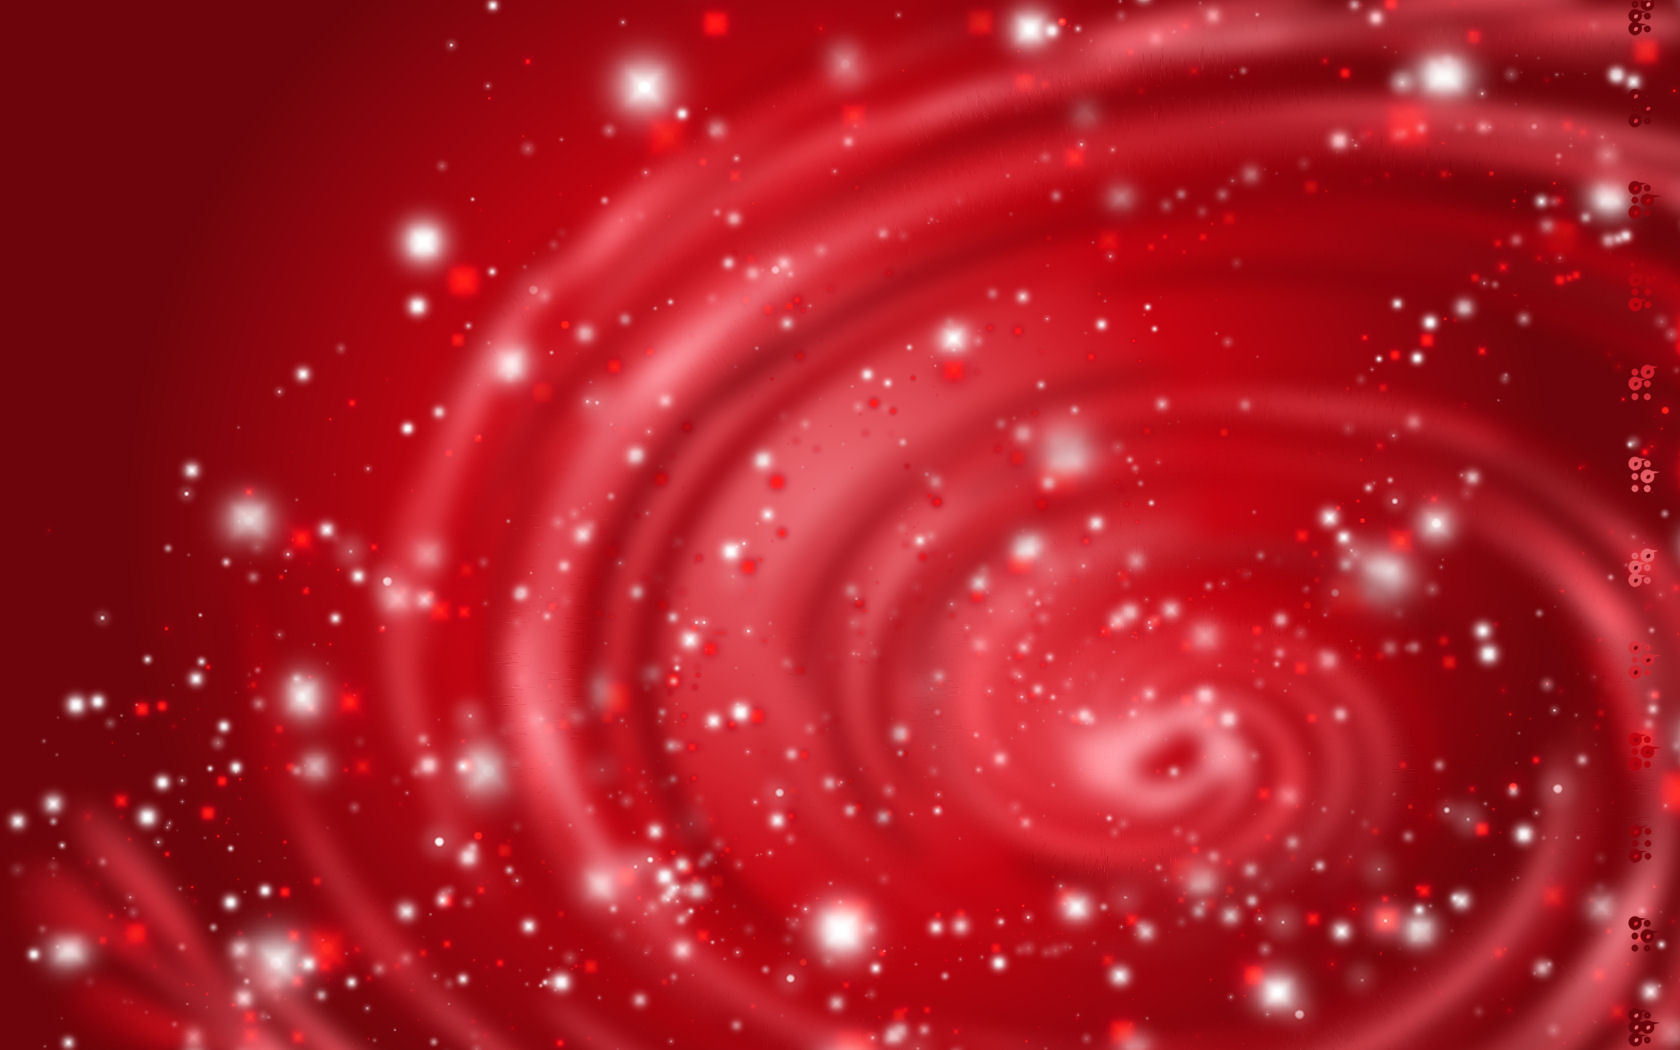 Red swirl with stars Background